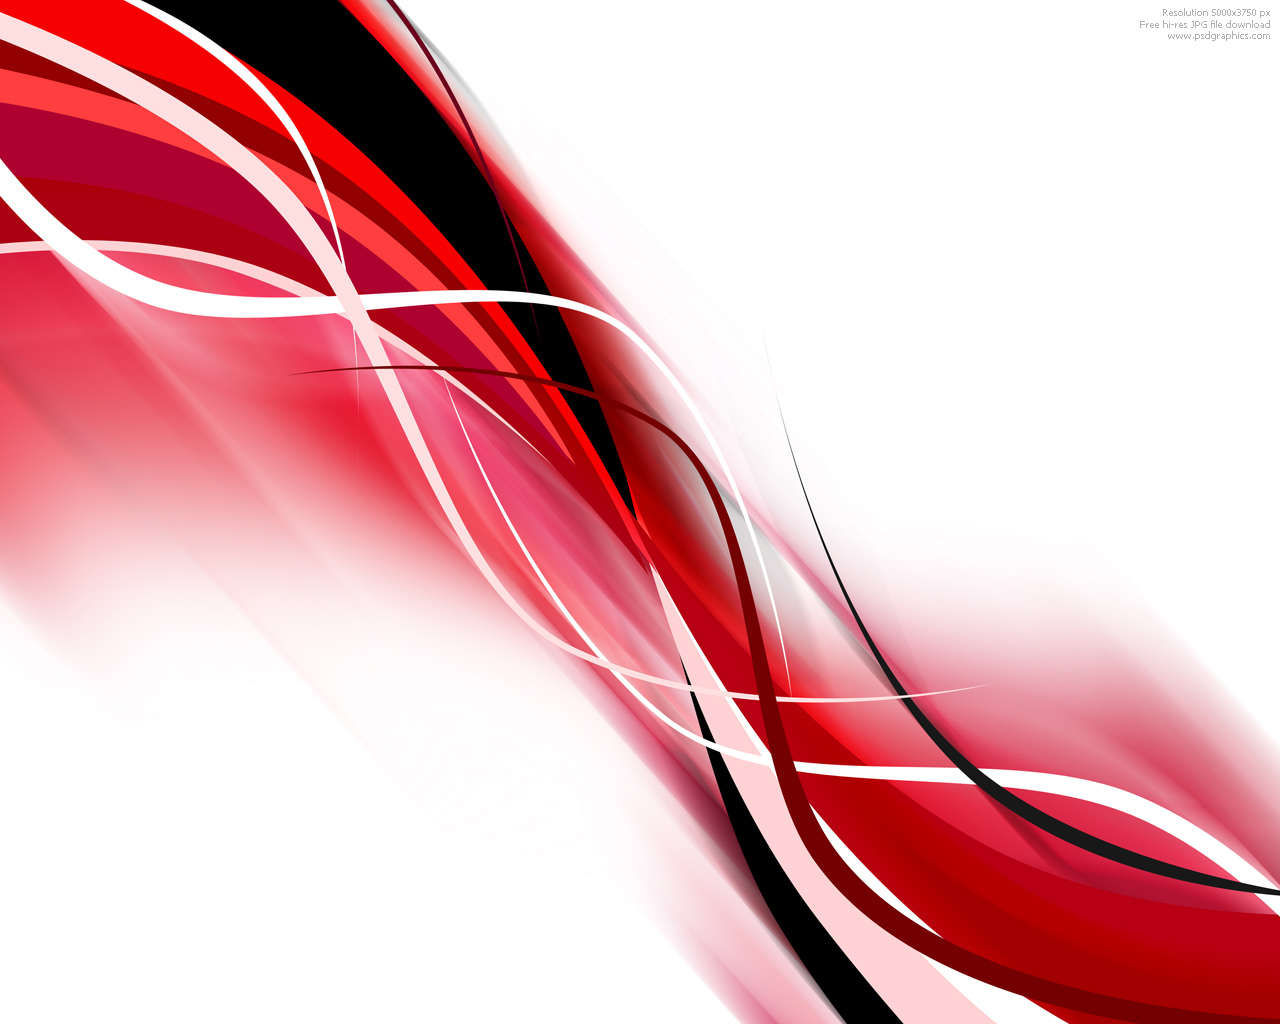 Red And Blue Abstract Waves Background Psdgraphics